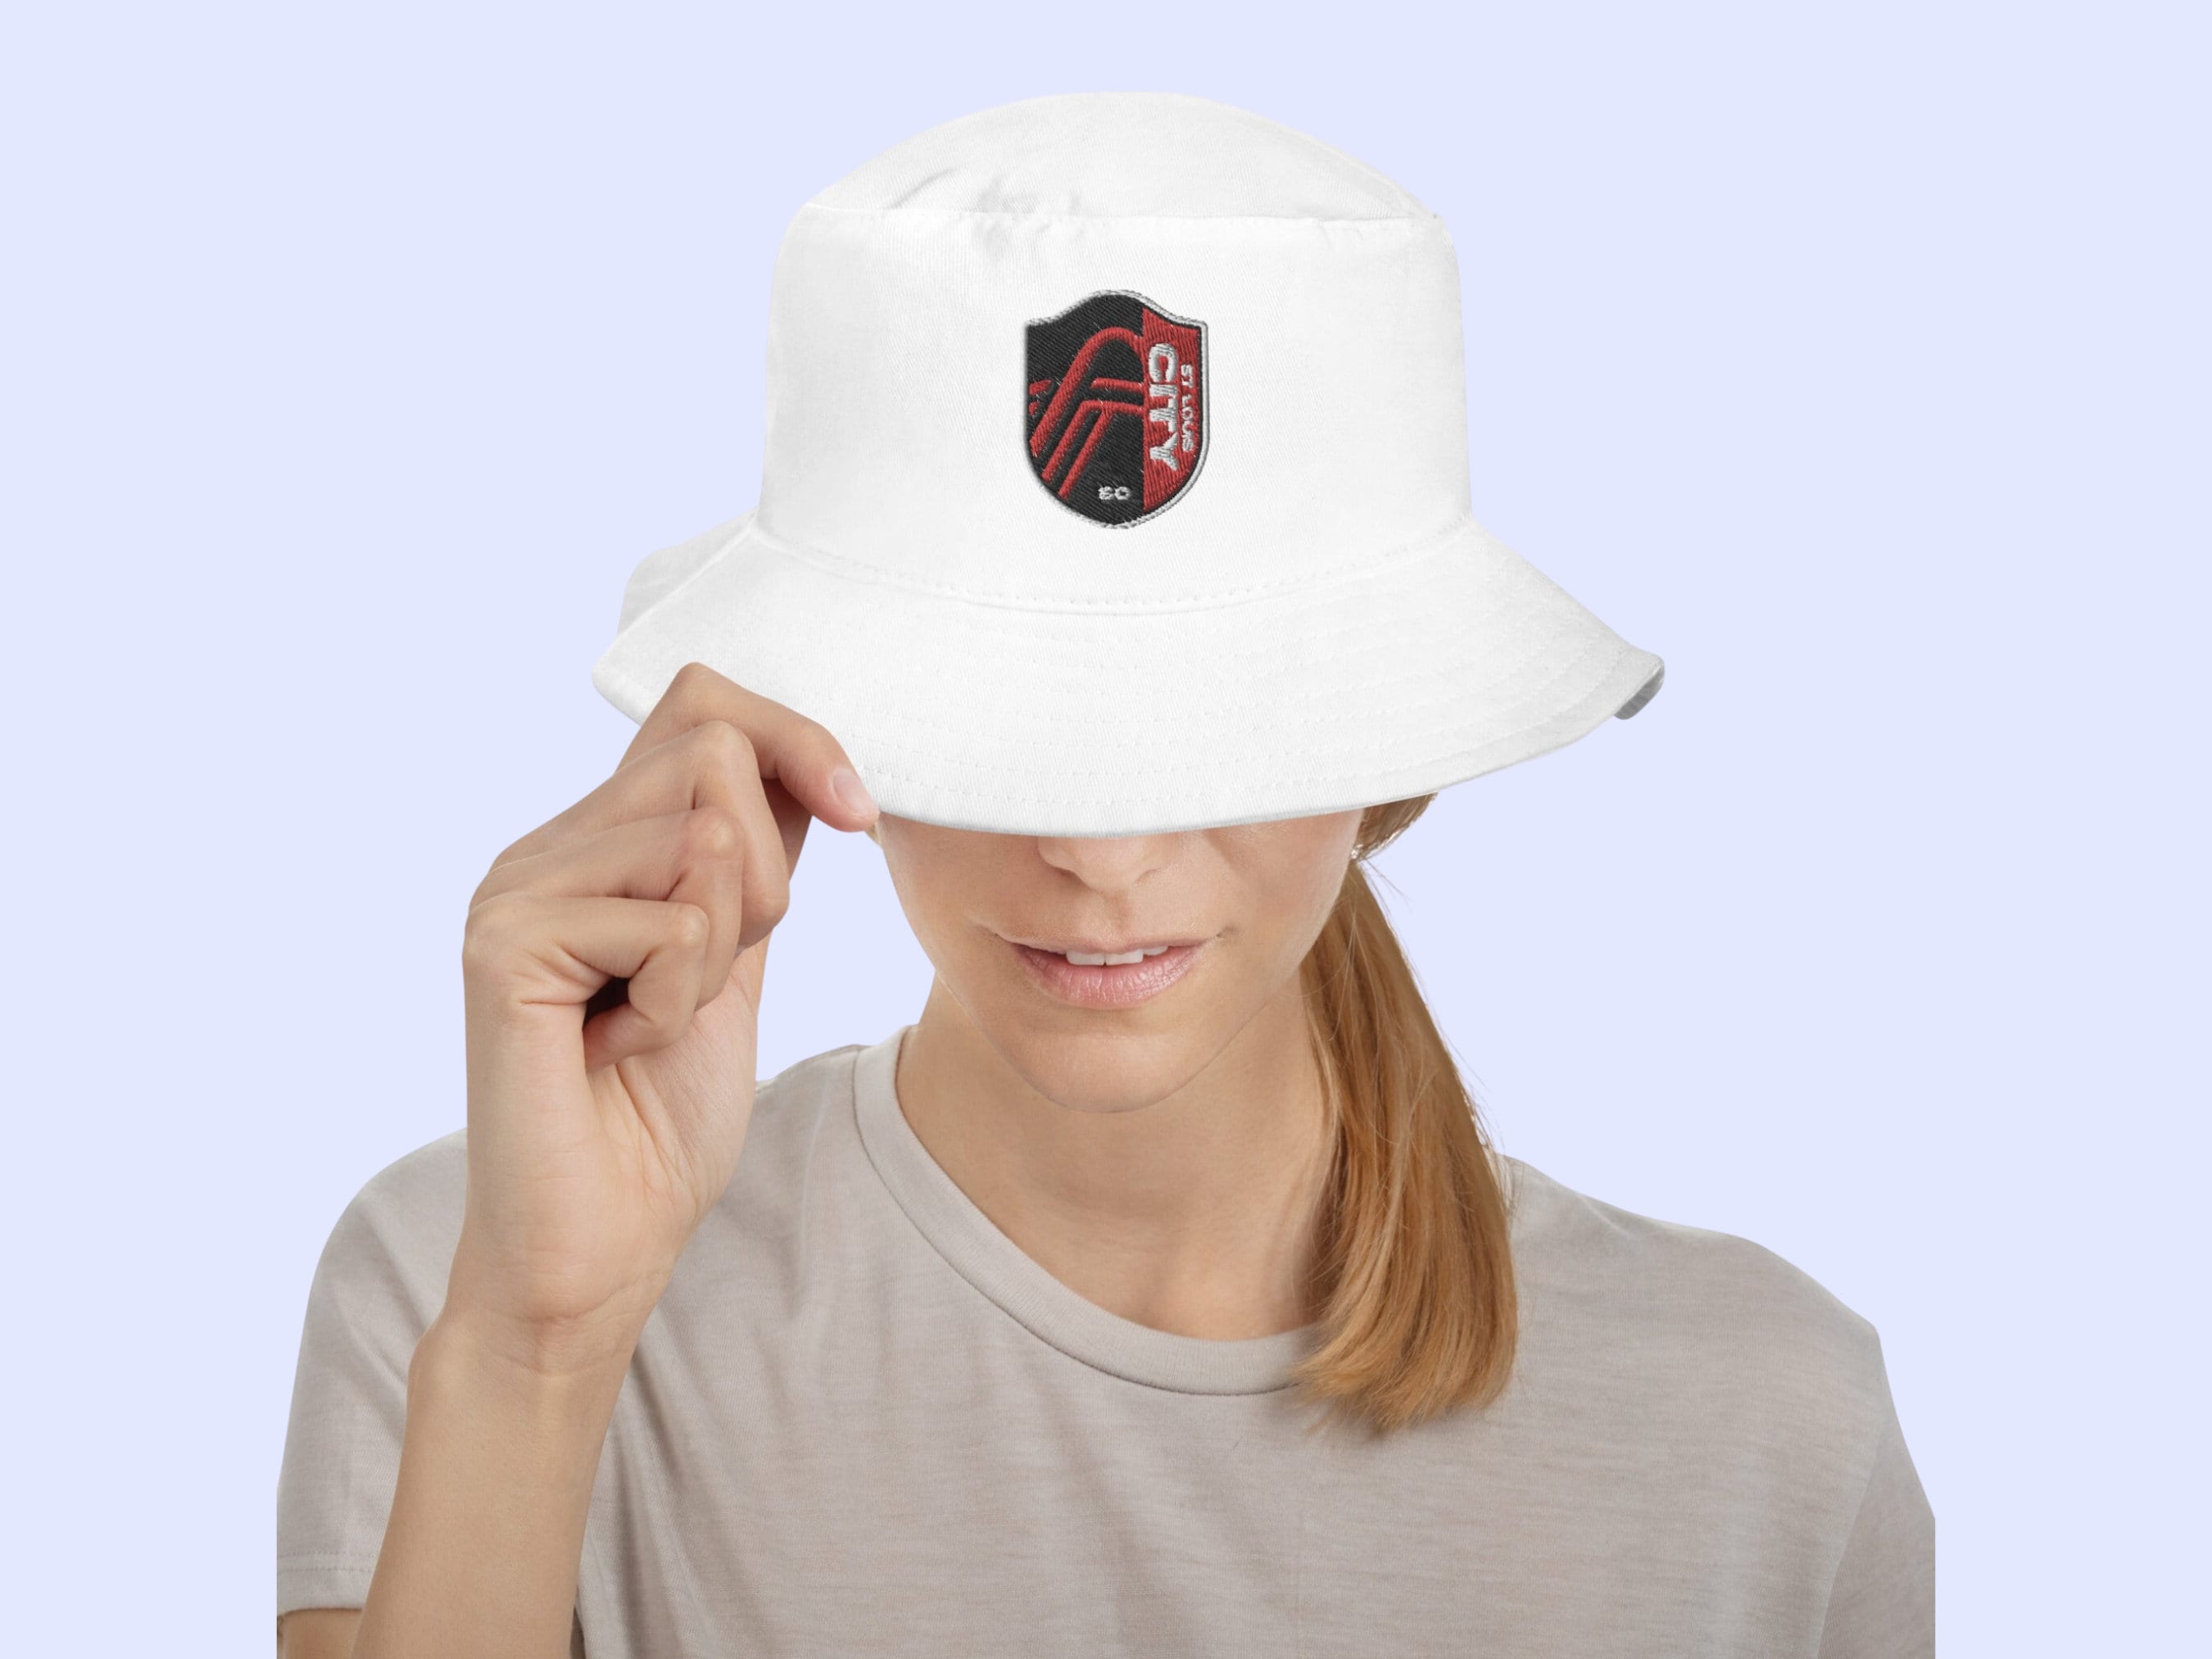 ST LOUIS CITY ARCH DESIGN Bucket Hat for Sale by mikesamad